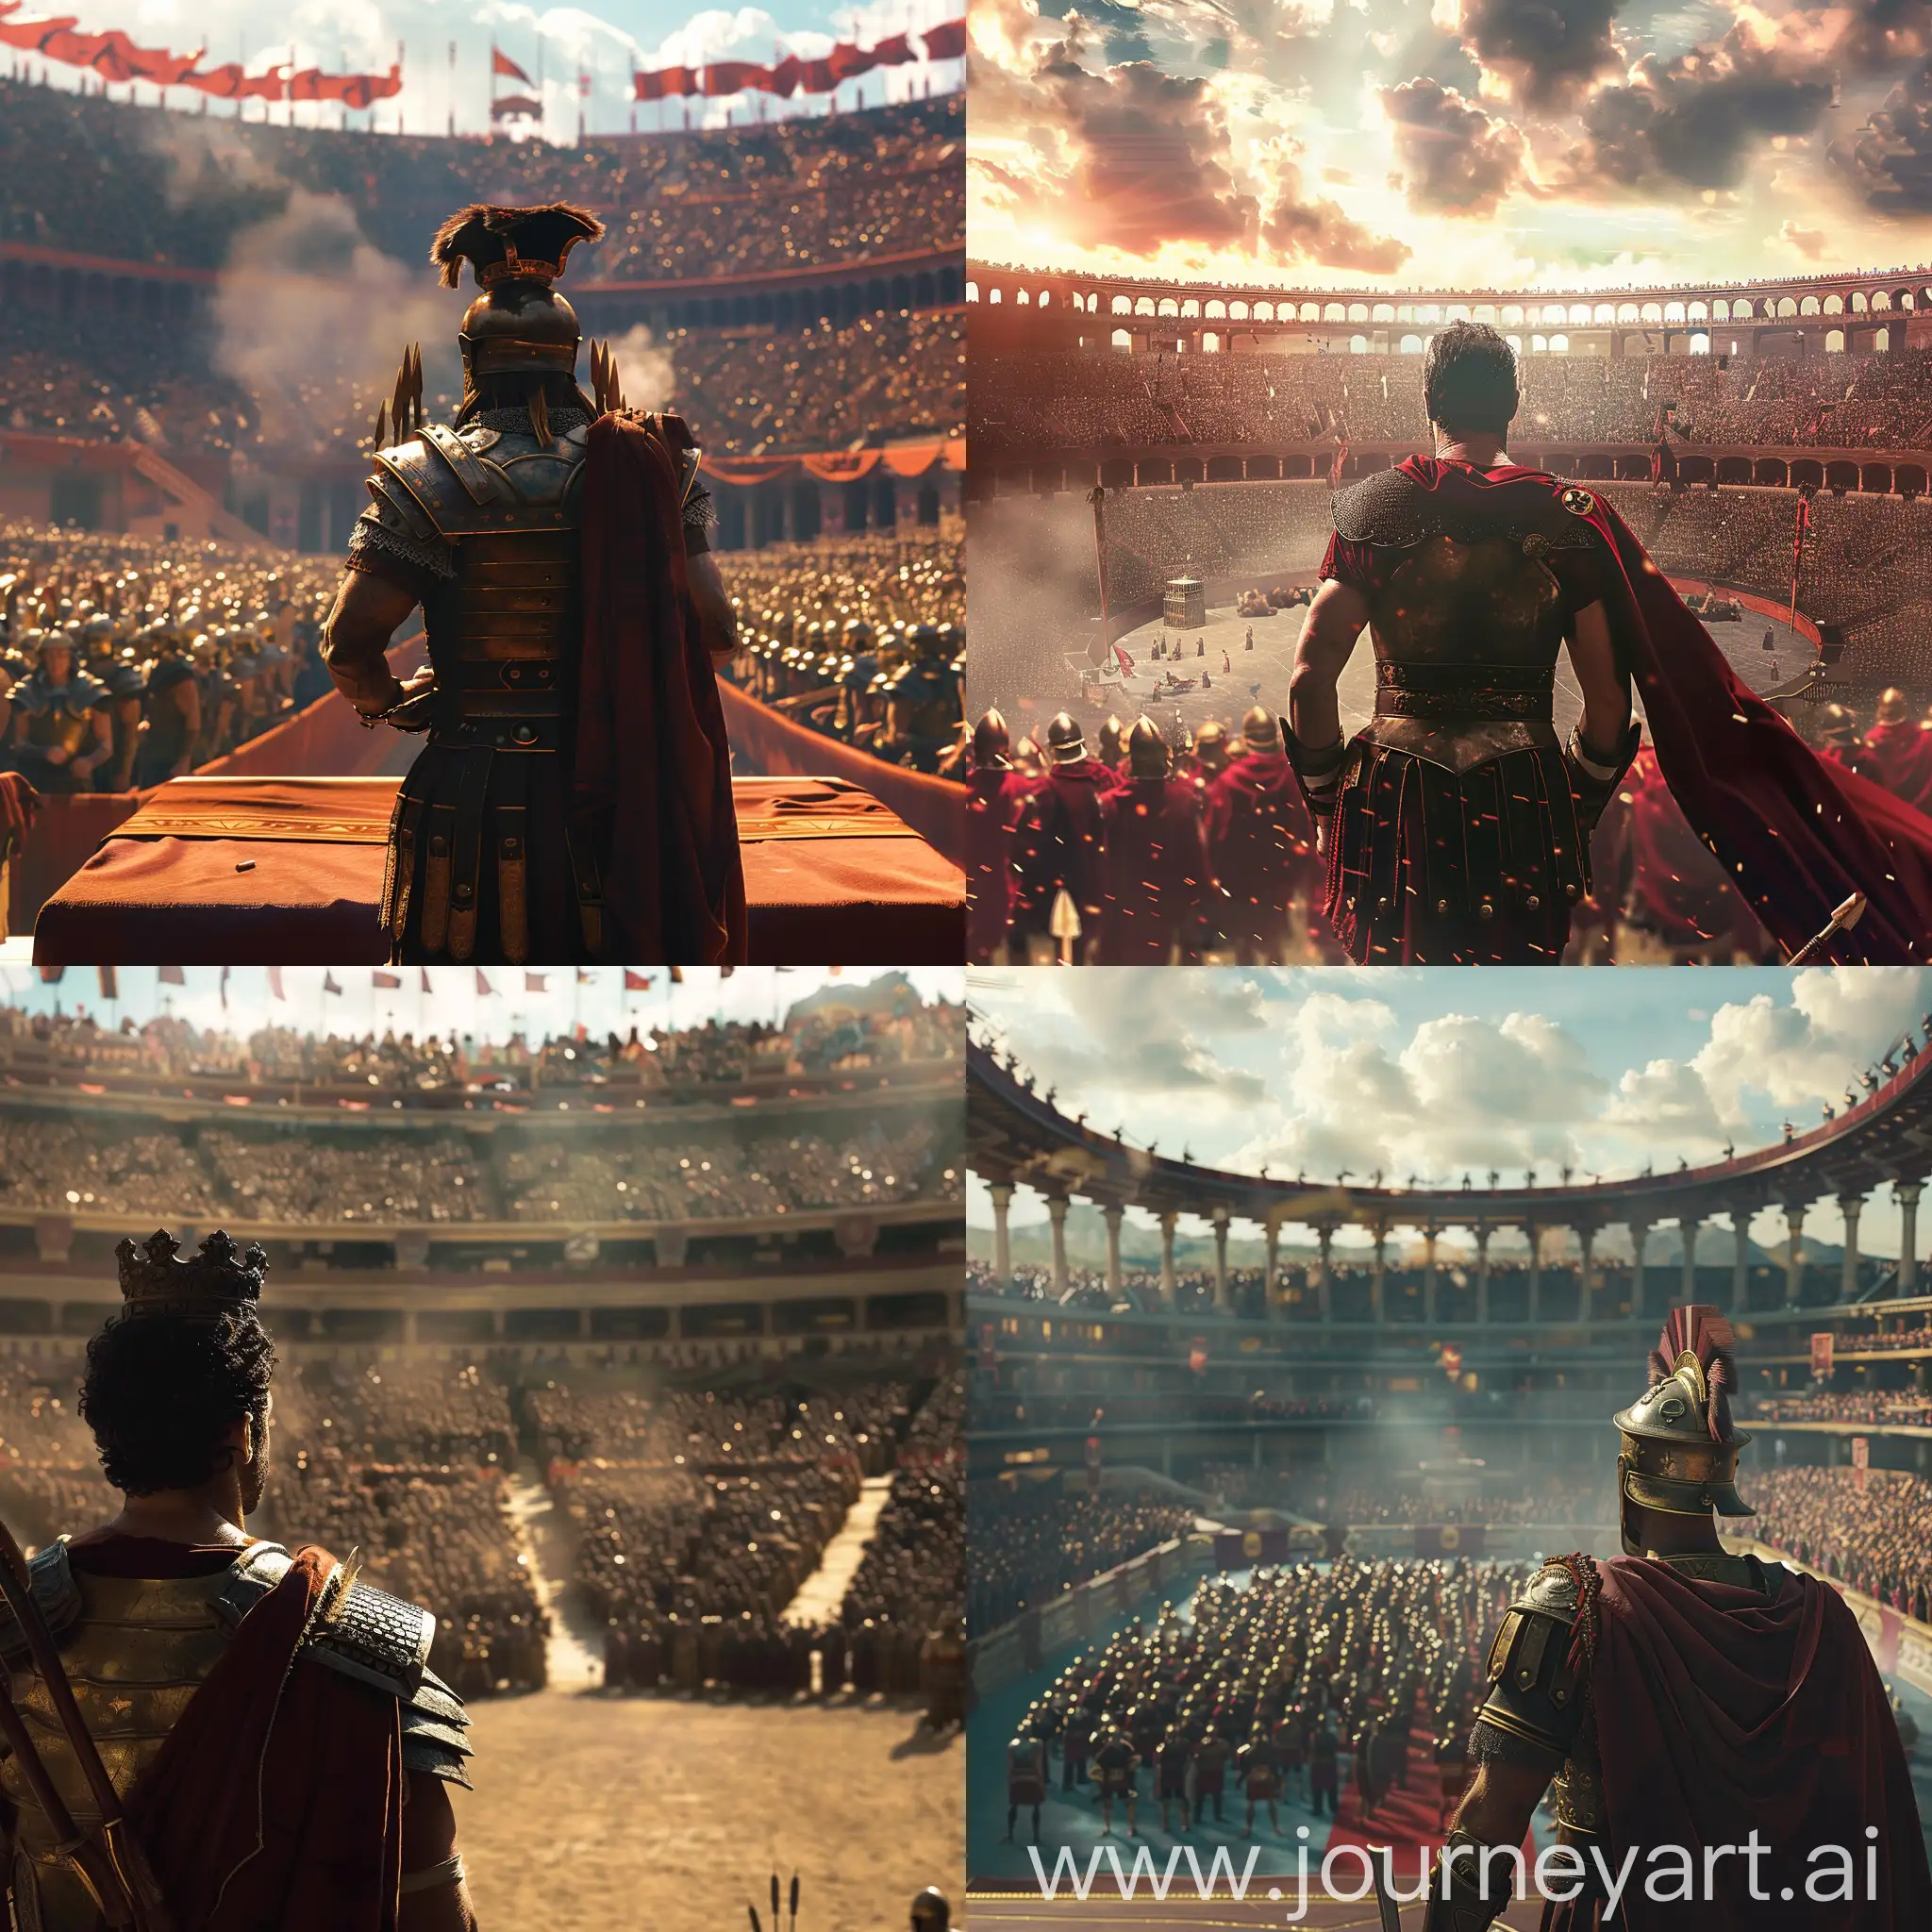 king to be crowed in a full stadium, epic background, make it feel like gladiator